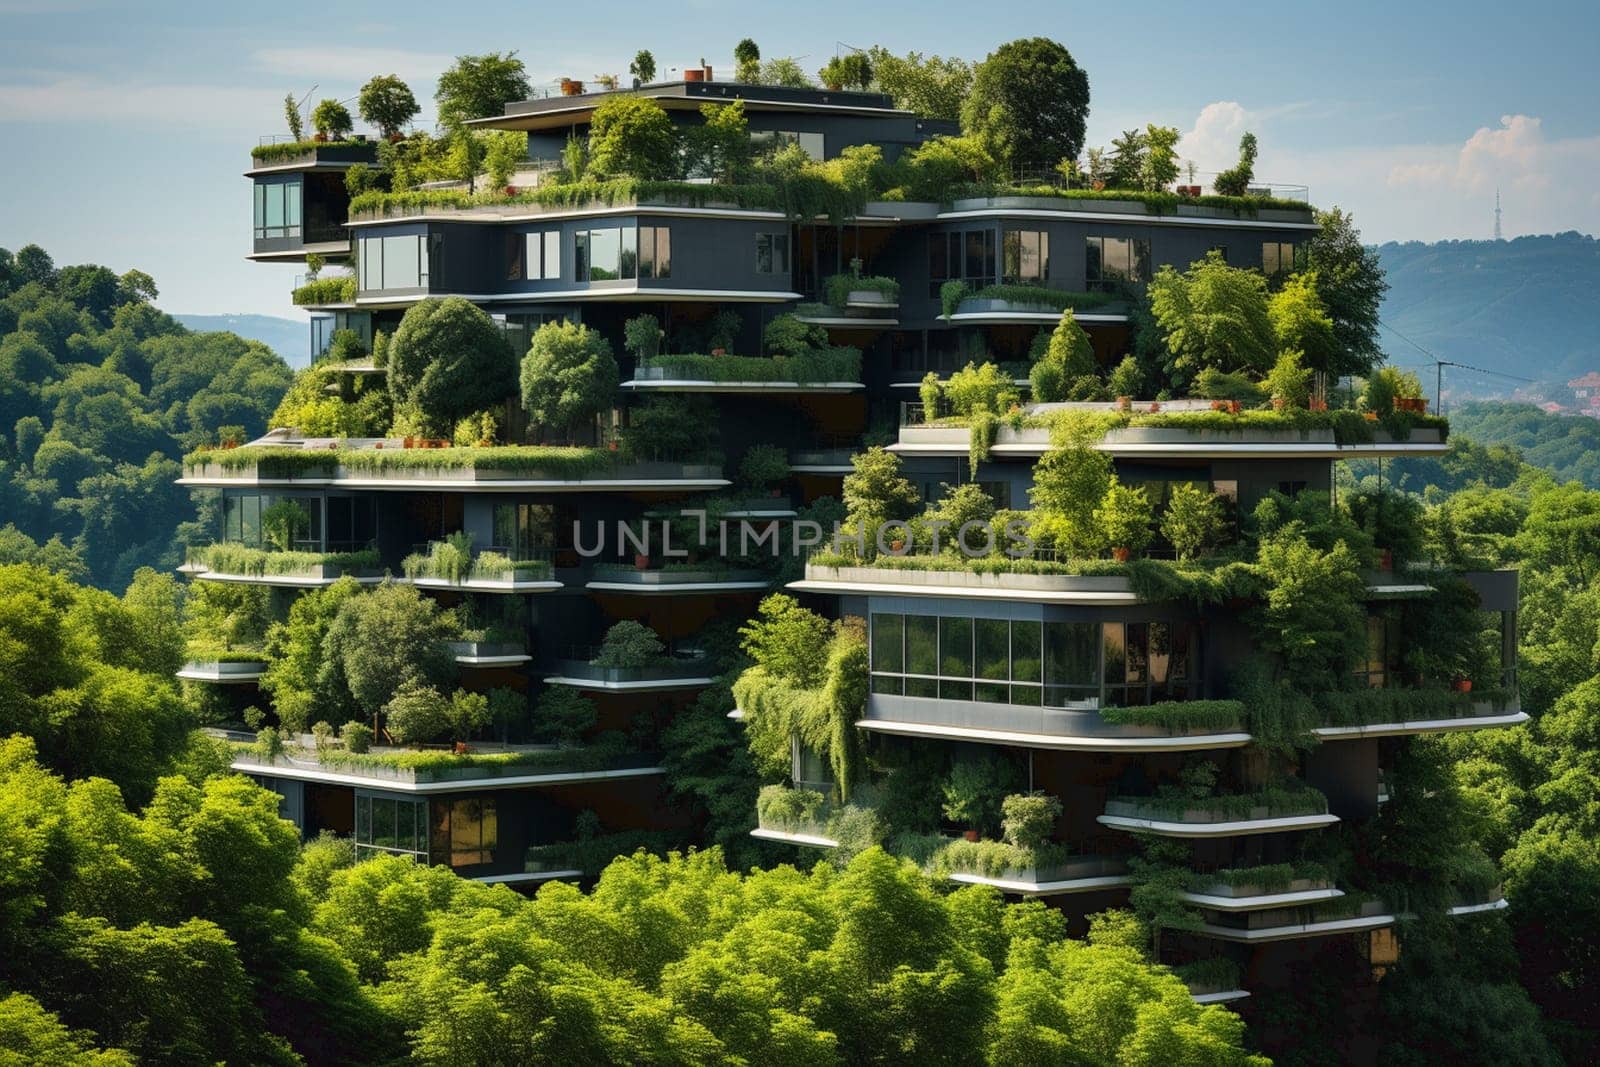 3D rendering of a futuristic modern construction with vegetation growing on it by Andelov13